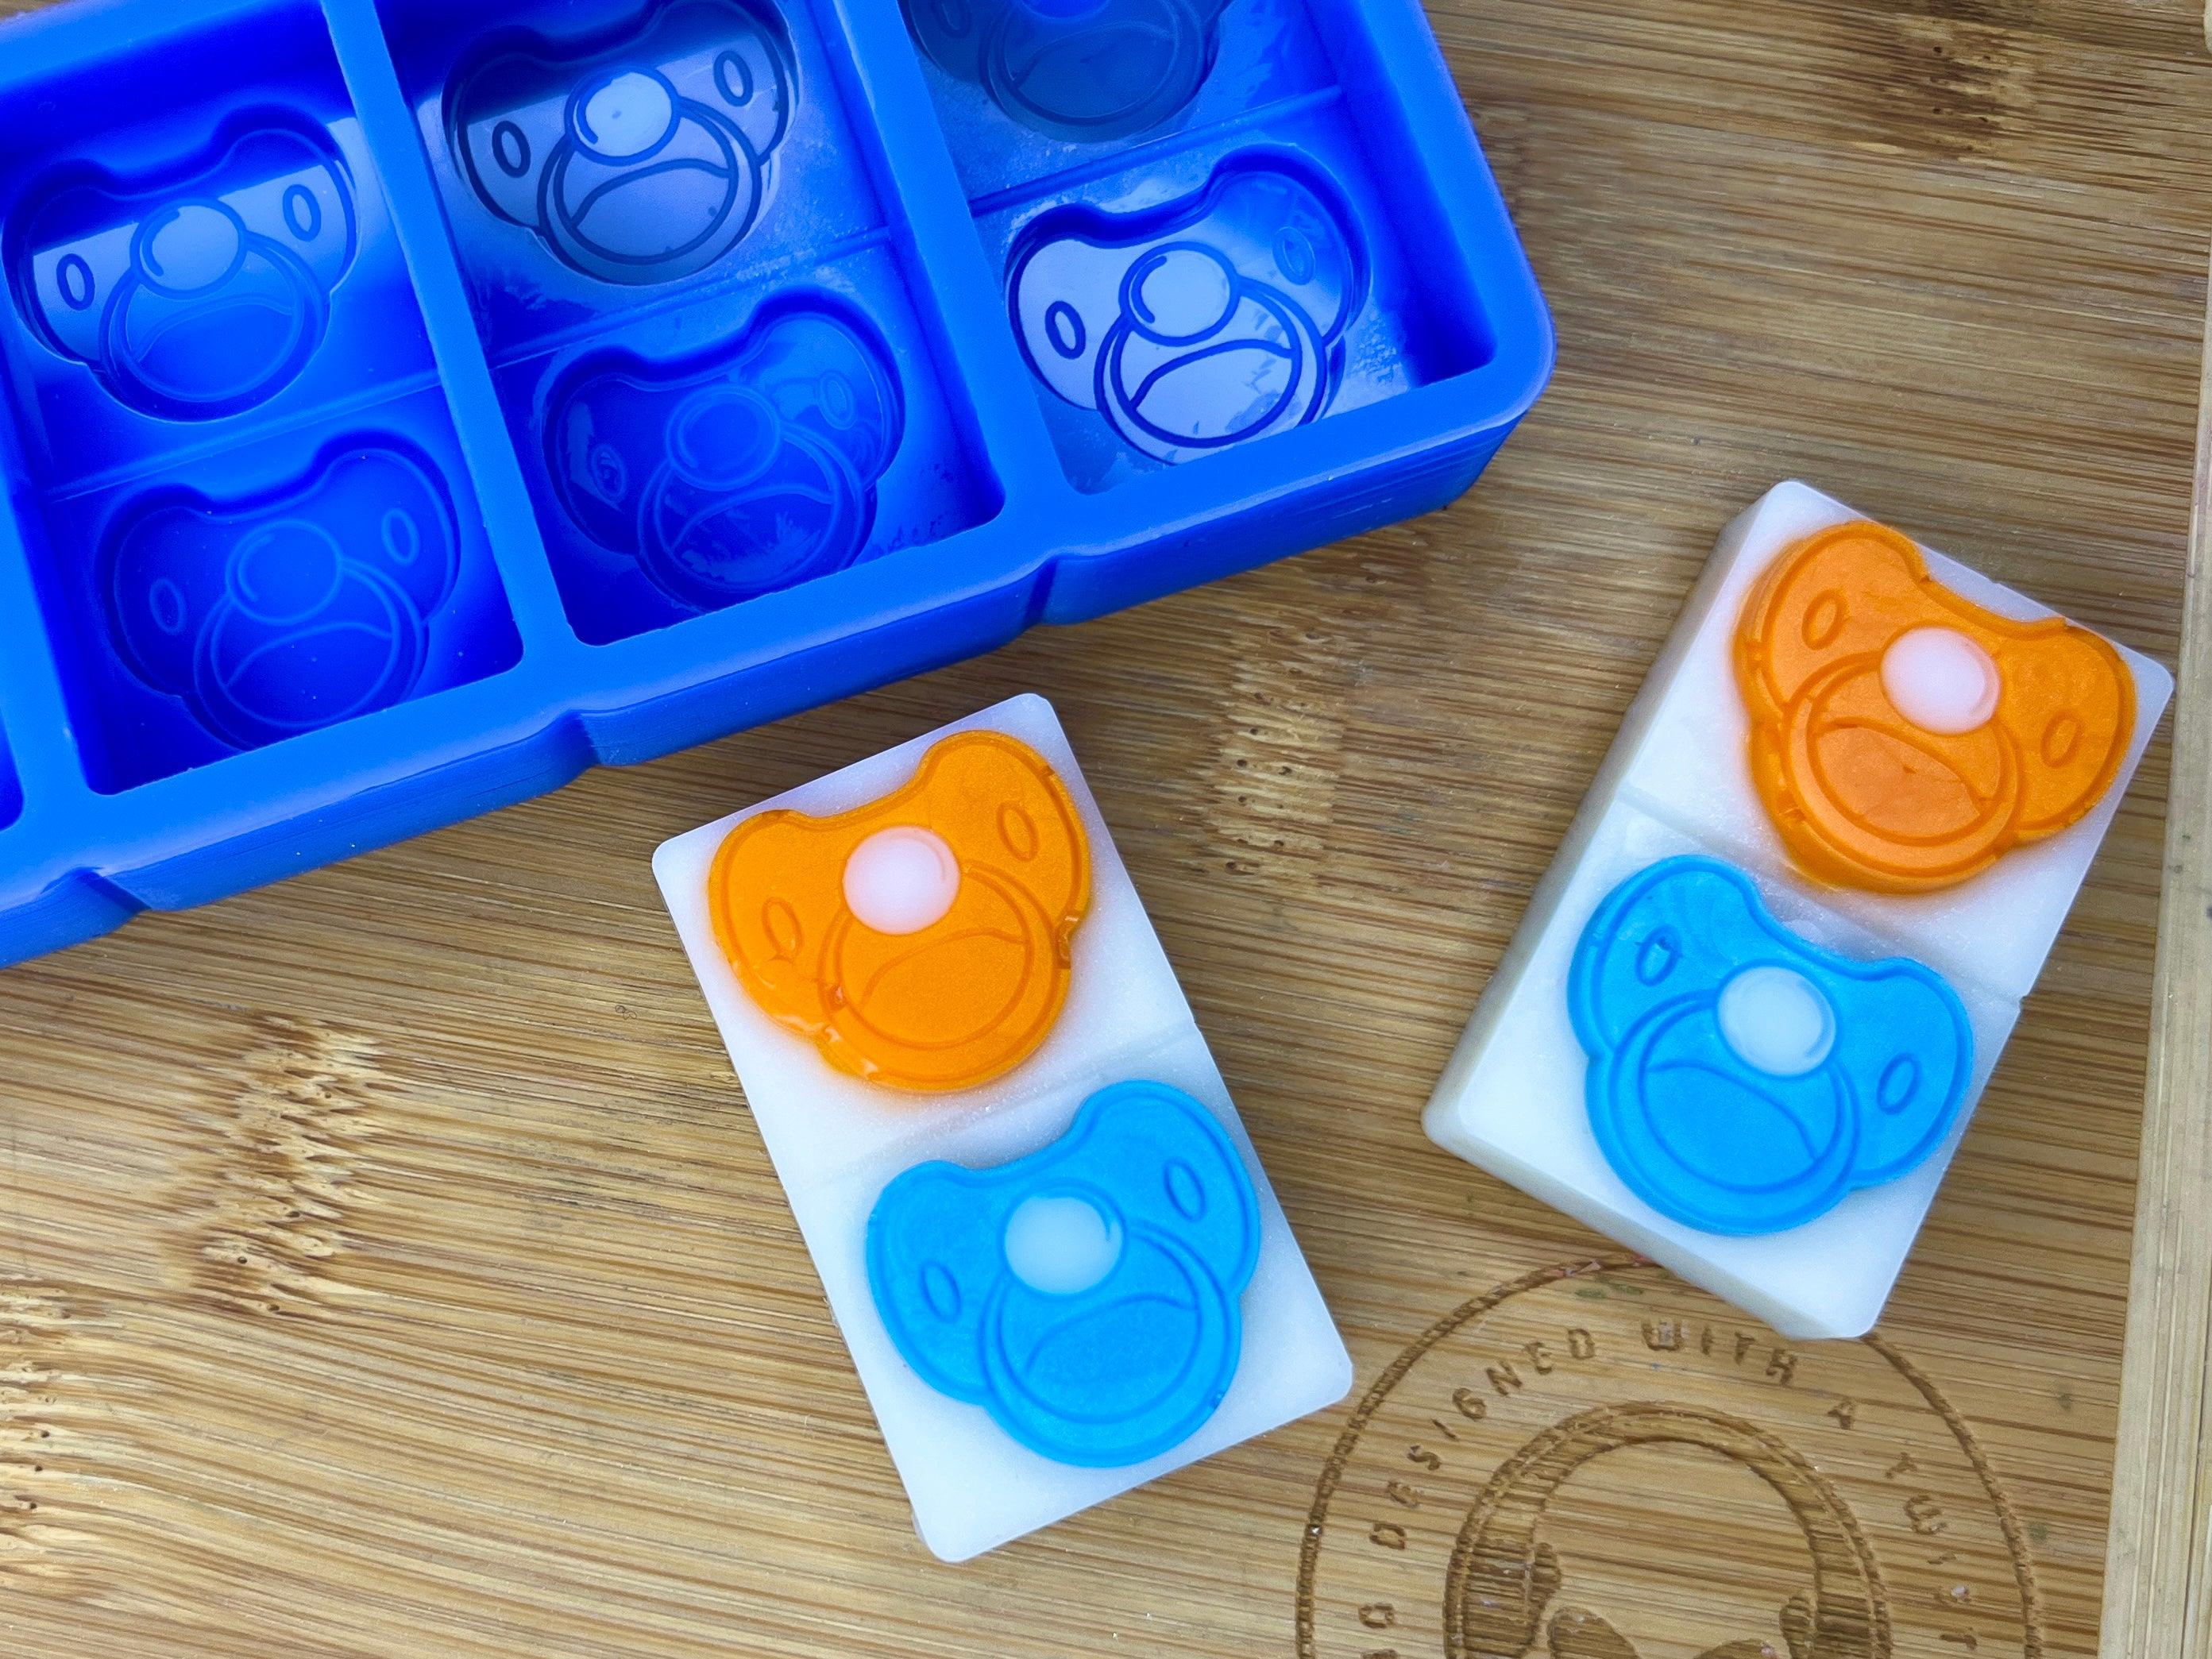 Baby Dummy Silicone Mold - HoBa Edition - Designed with a Twist - Top quality silicone molds made in the UK.